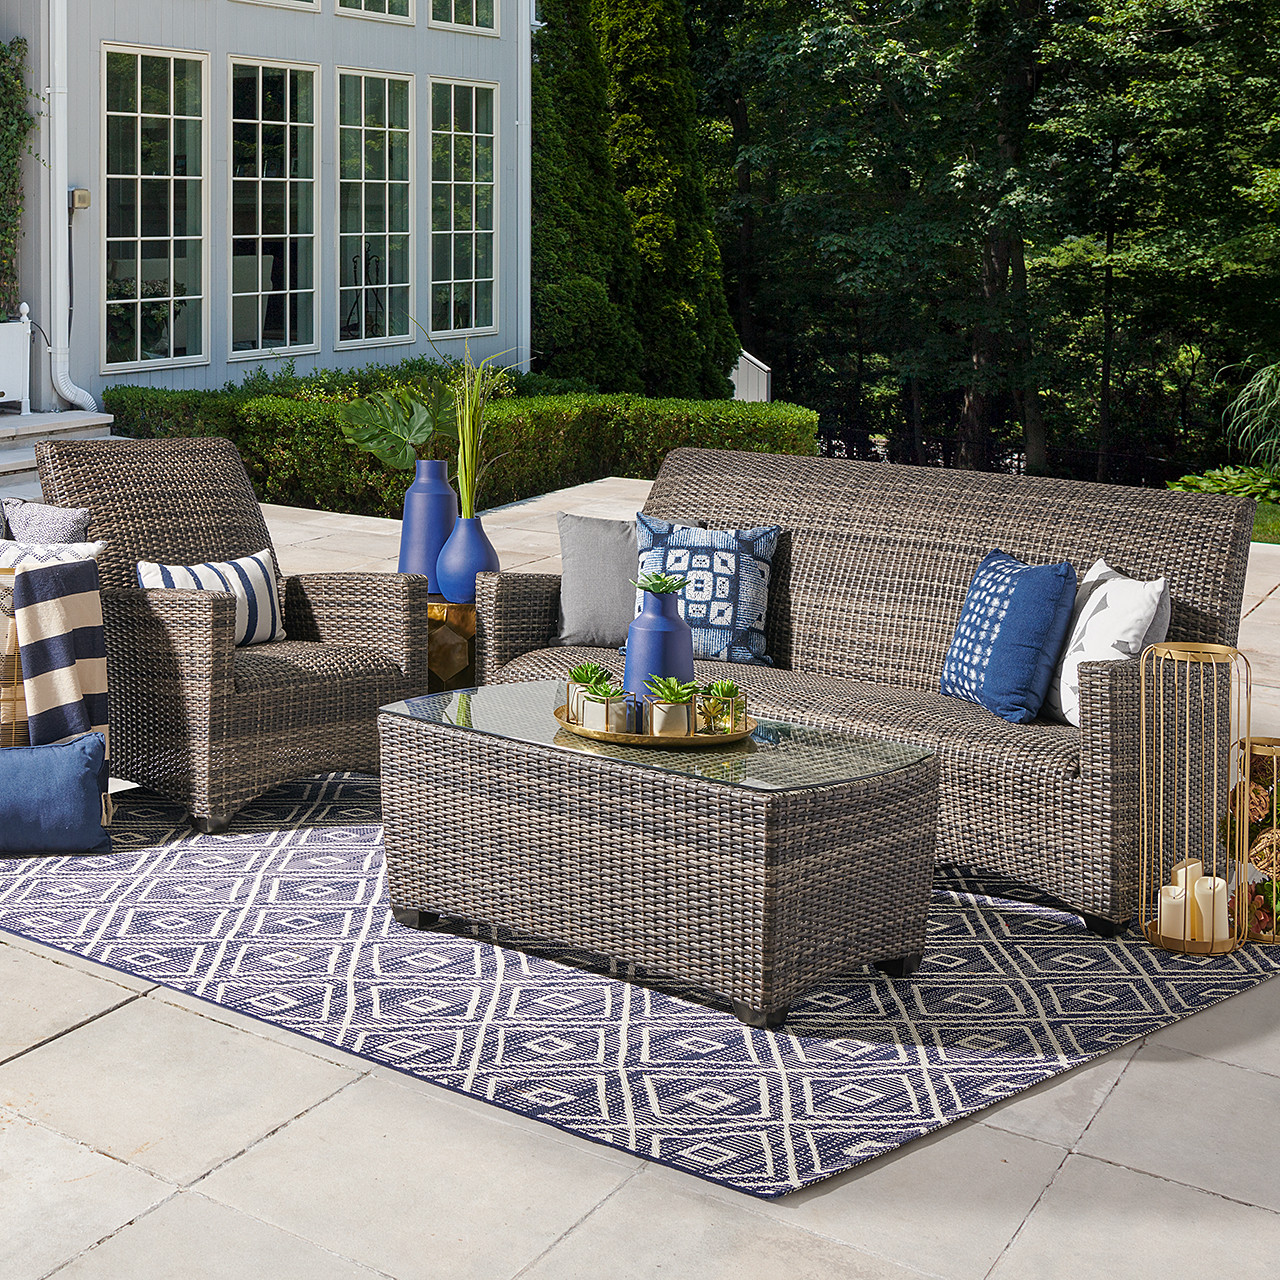 Sydney Husk Outdoor Wicker and Concealed Cushion 3 Pc. Sofa Group with 44 x 24 in. Coffee Table